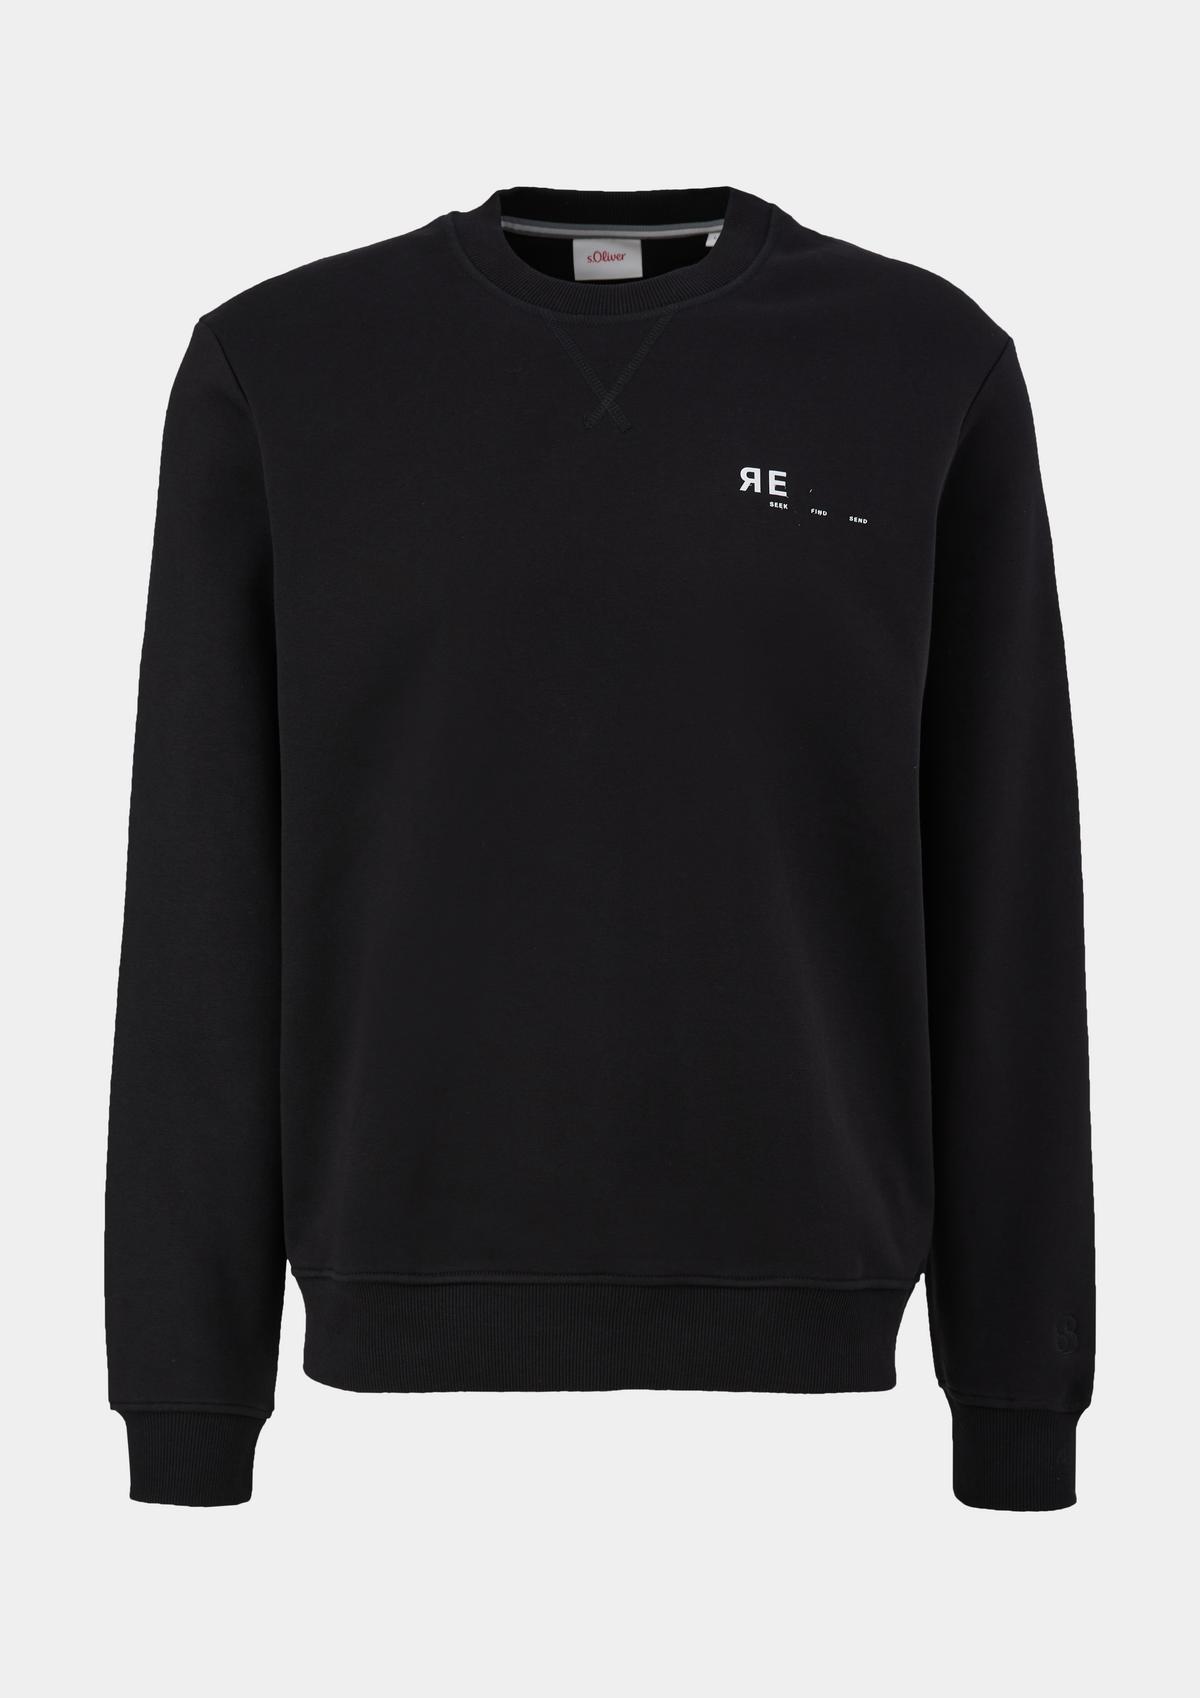 s.Oliver Sweatshirt with lettering and a back print